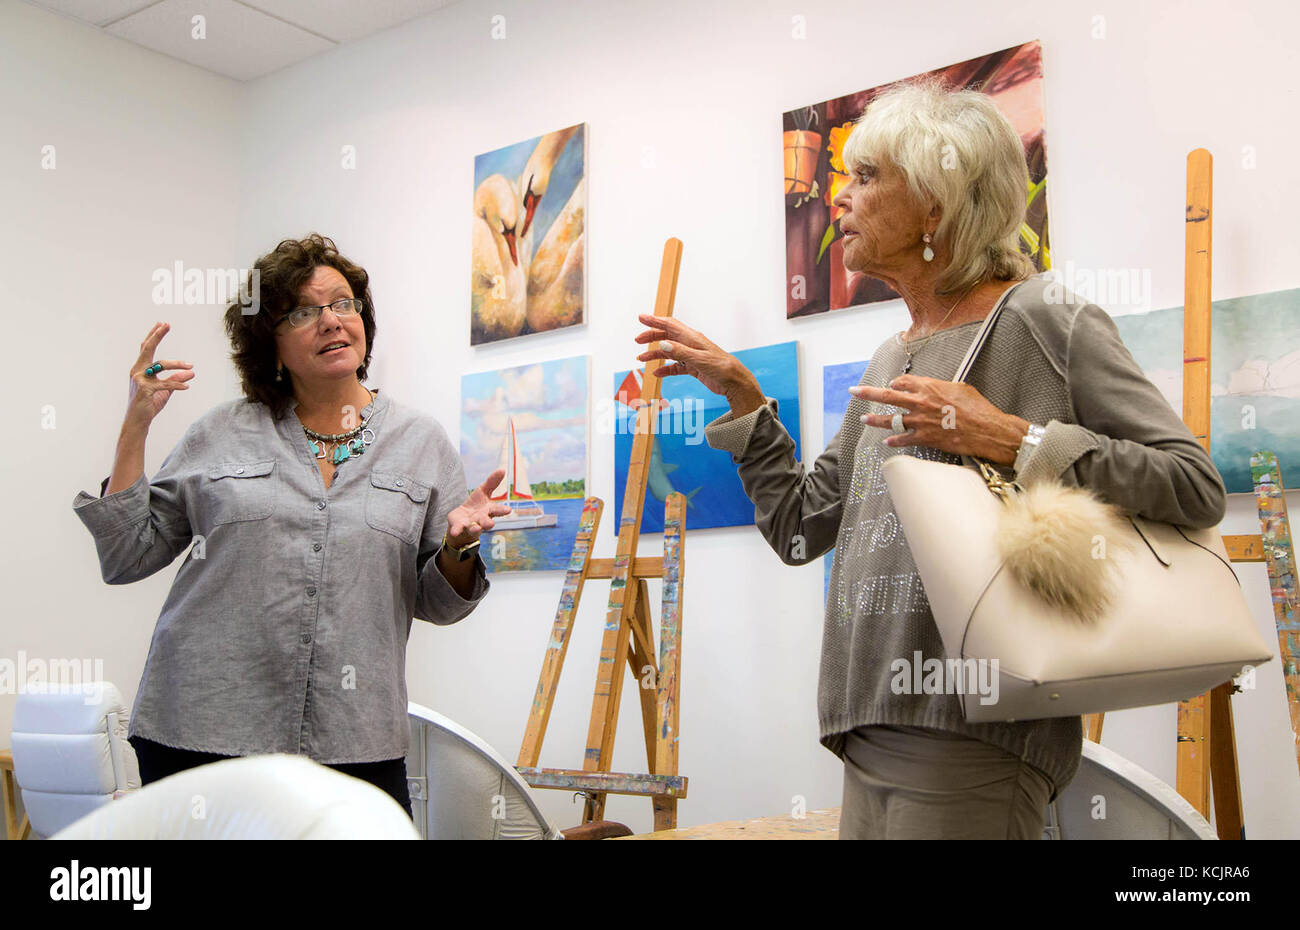 Palm Beach Gardens, Florida, USA. 5th Oct, 2017. Myrtha Barris (left) gives a tour of her art school to Princess Birgitta of Sweden. Barris moved the Academy of Fine Art out of the Crystal Tree Plaza into the flourishing arts district on Park Avenue in Lake Park, where it's having a royal grand opening Friday: Princess Birgitta of Sweden will be the guest of honor. Some small businesses left Crystal Tree Plaza because of high rents for redevelopment of the plaza. Credit: Allen Eyestone/The Palm Beach Post/ZUMA Wire/Alamy Live News Stock Photo